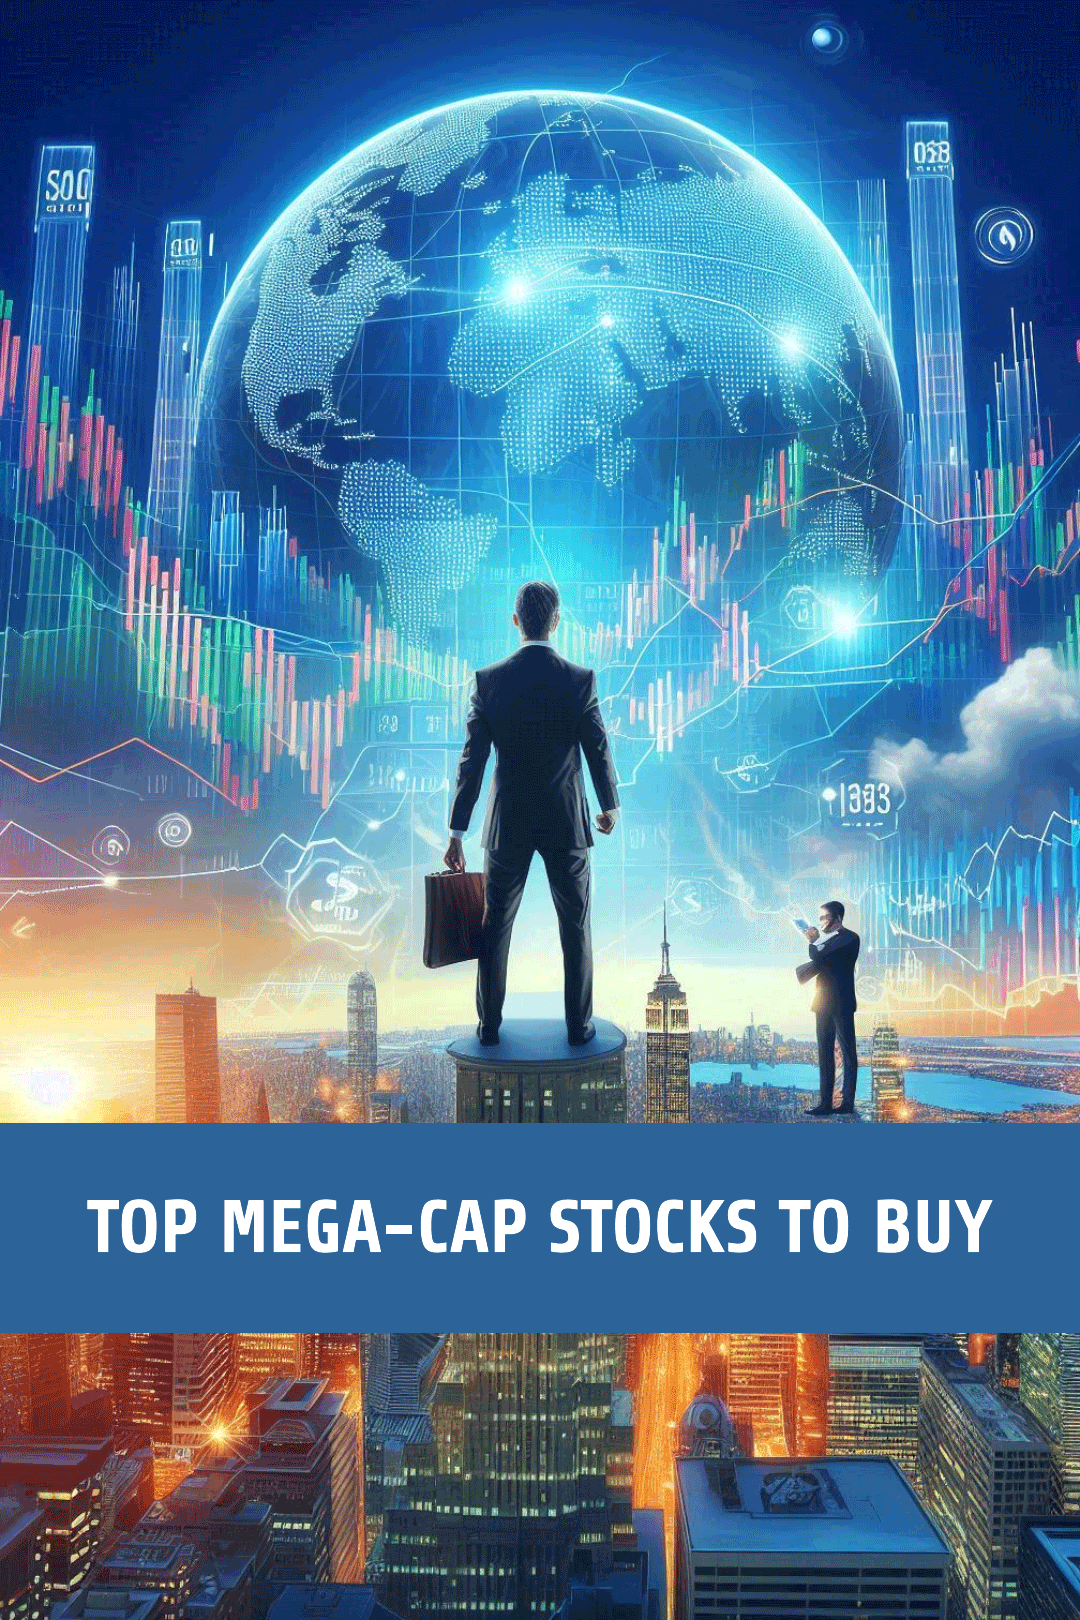 Top mega-cap stocks to buy and hold forever